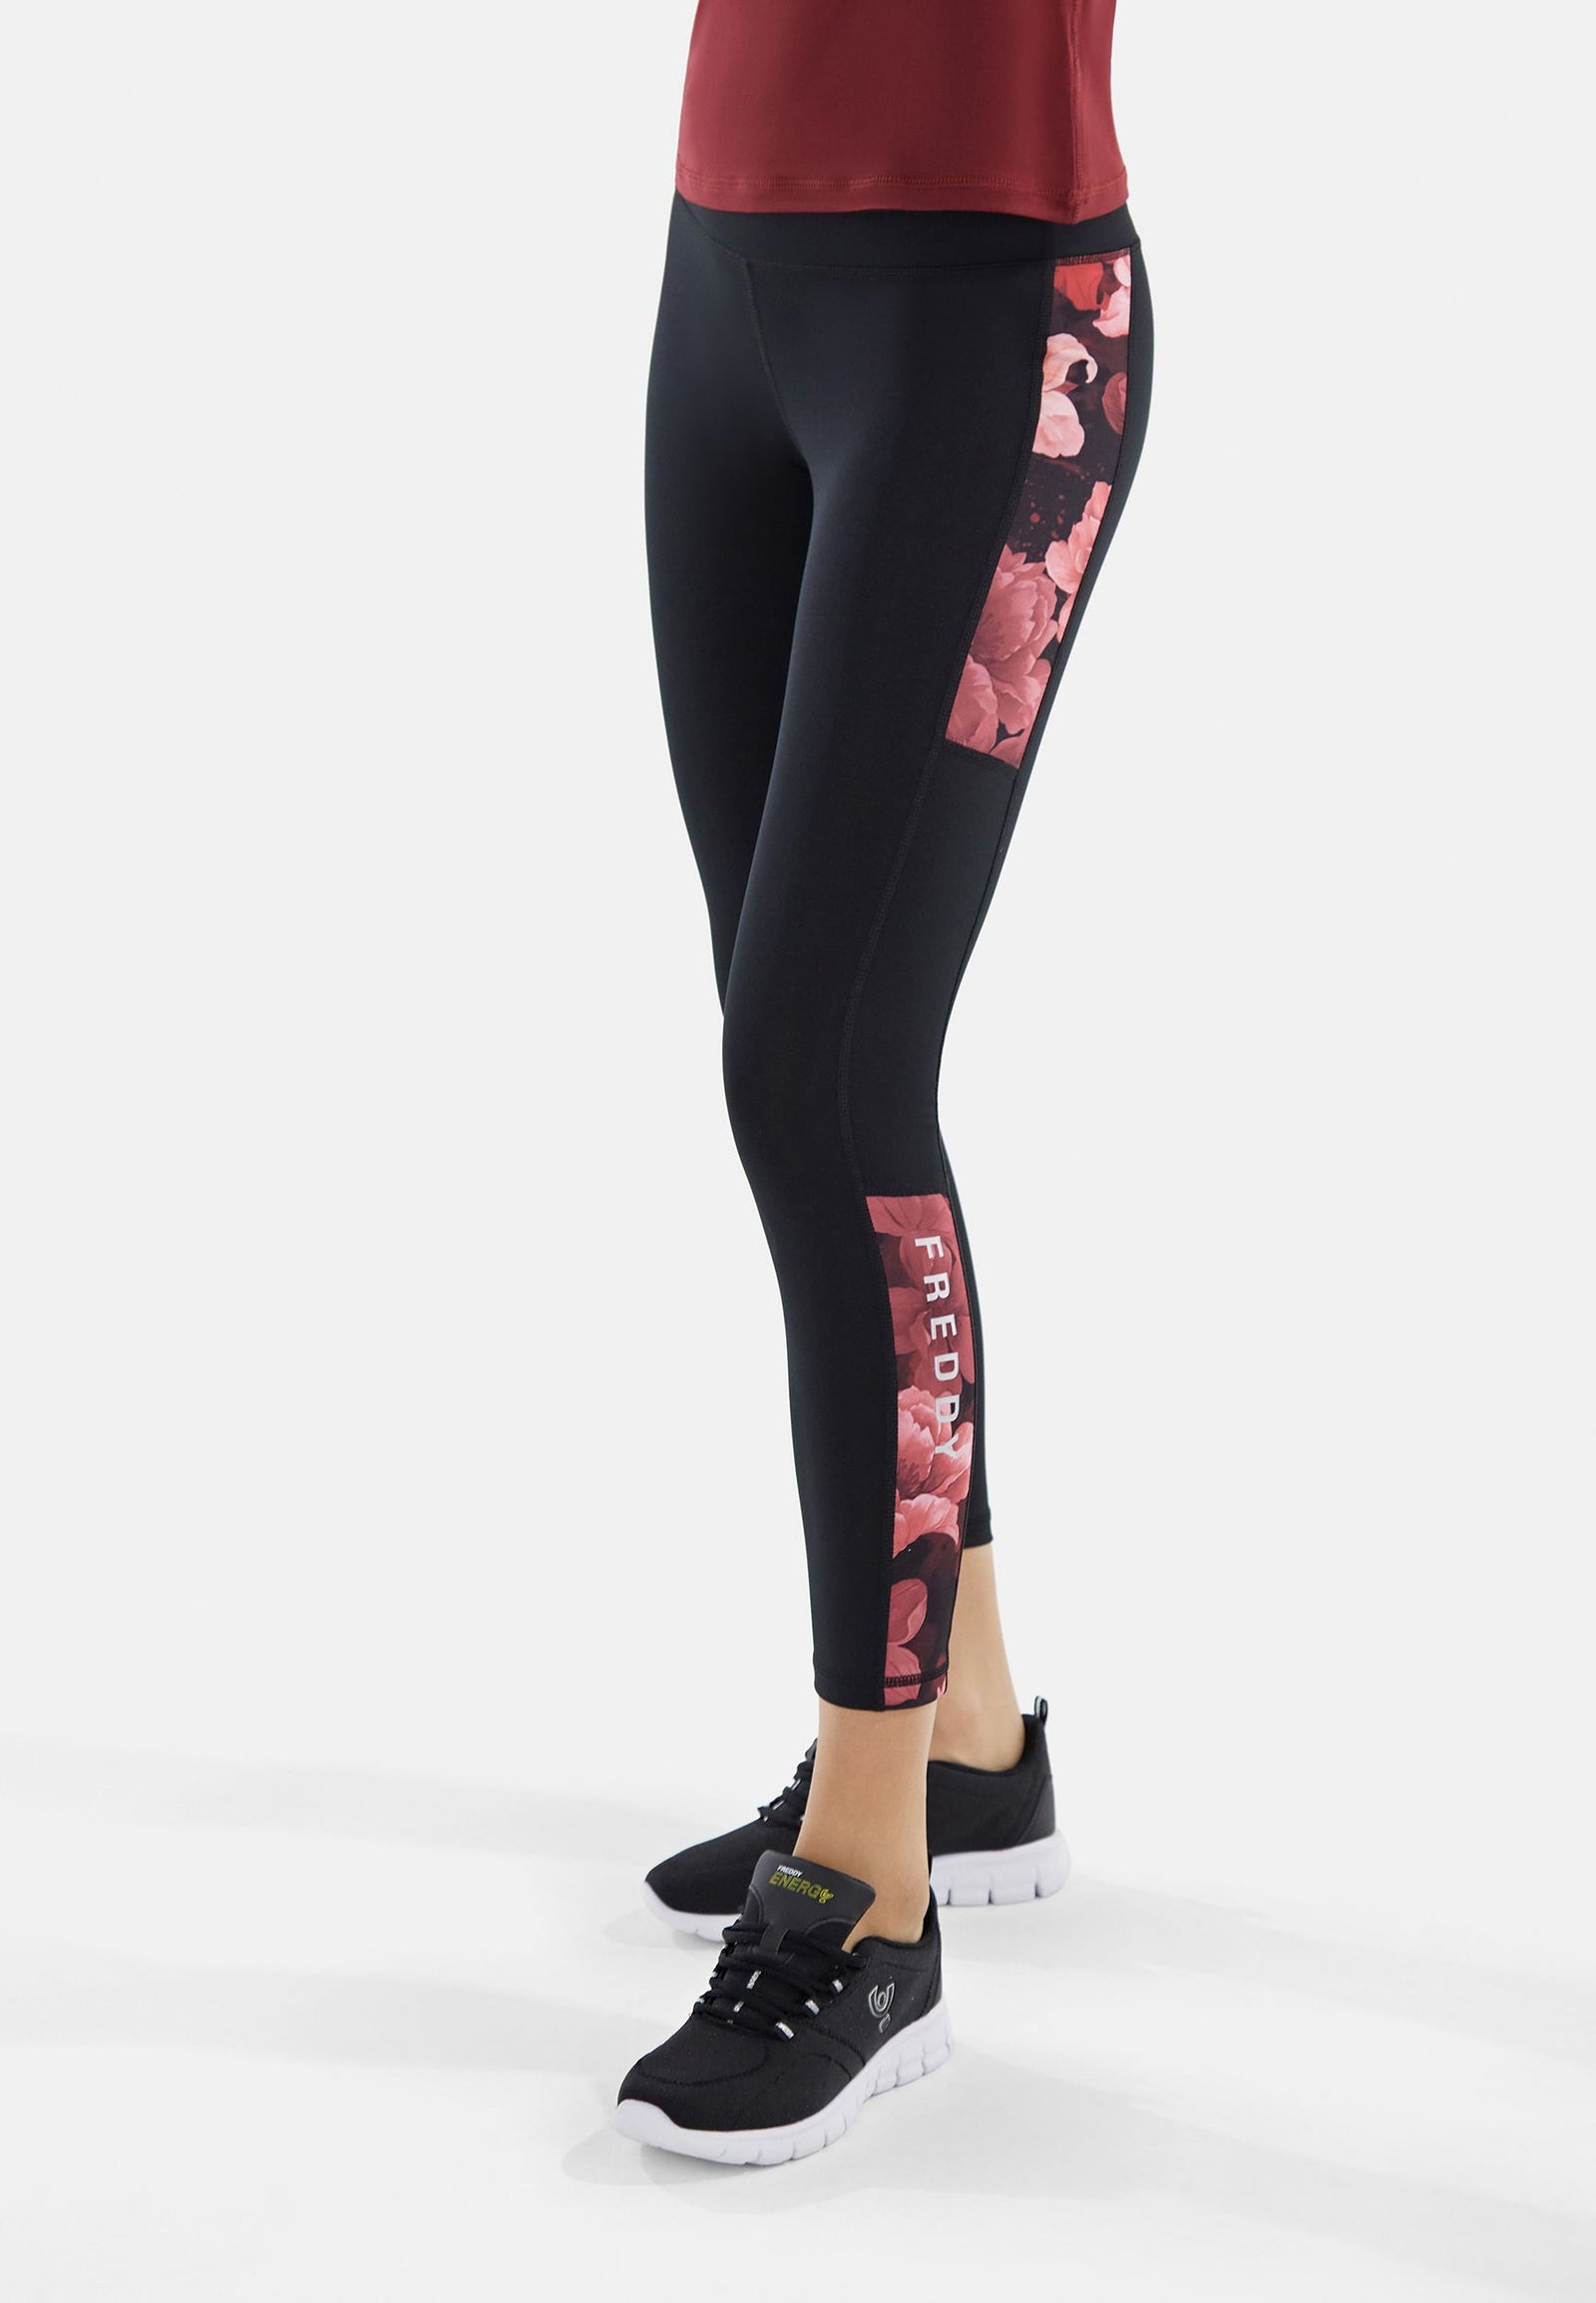 Gym Leggings for Women DUO Black-Pink E-store  - Polish  manufacturer of sportswear for fitness, Crossfit, gym, running. Quick  delivery and easy return and exchange